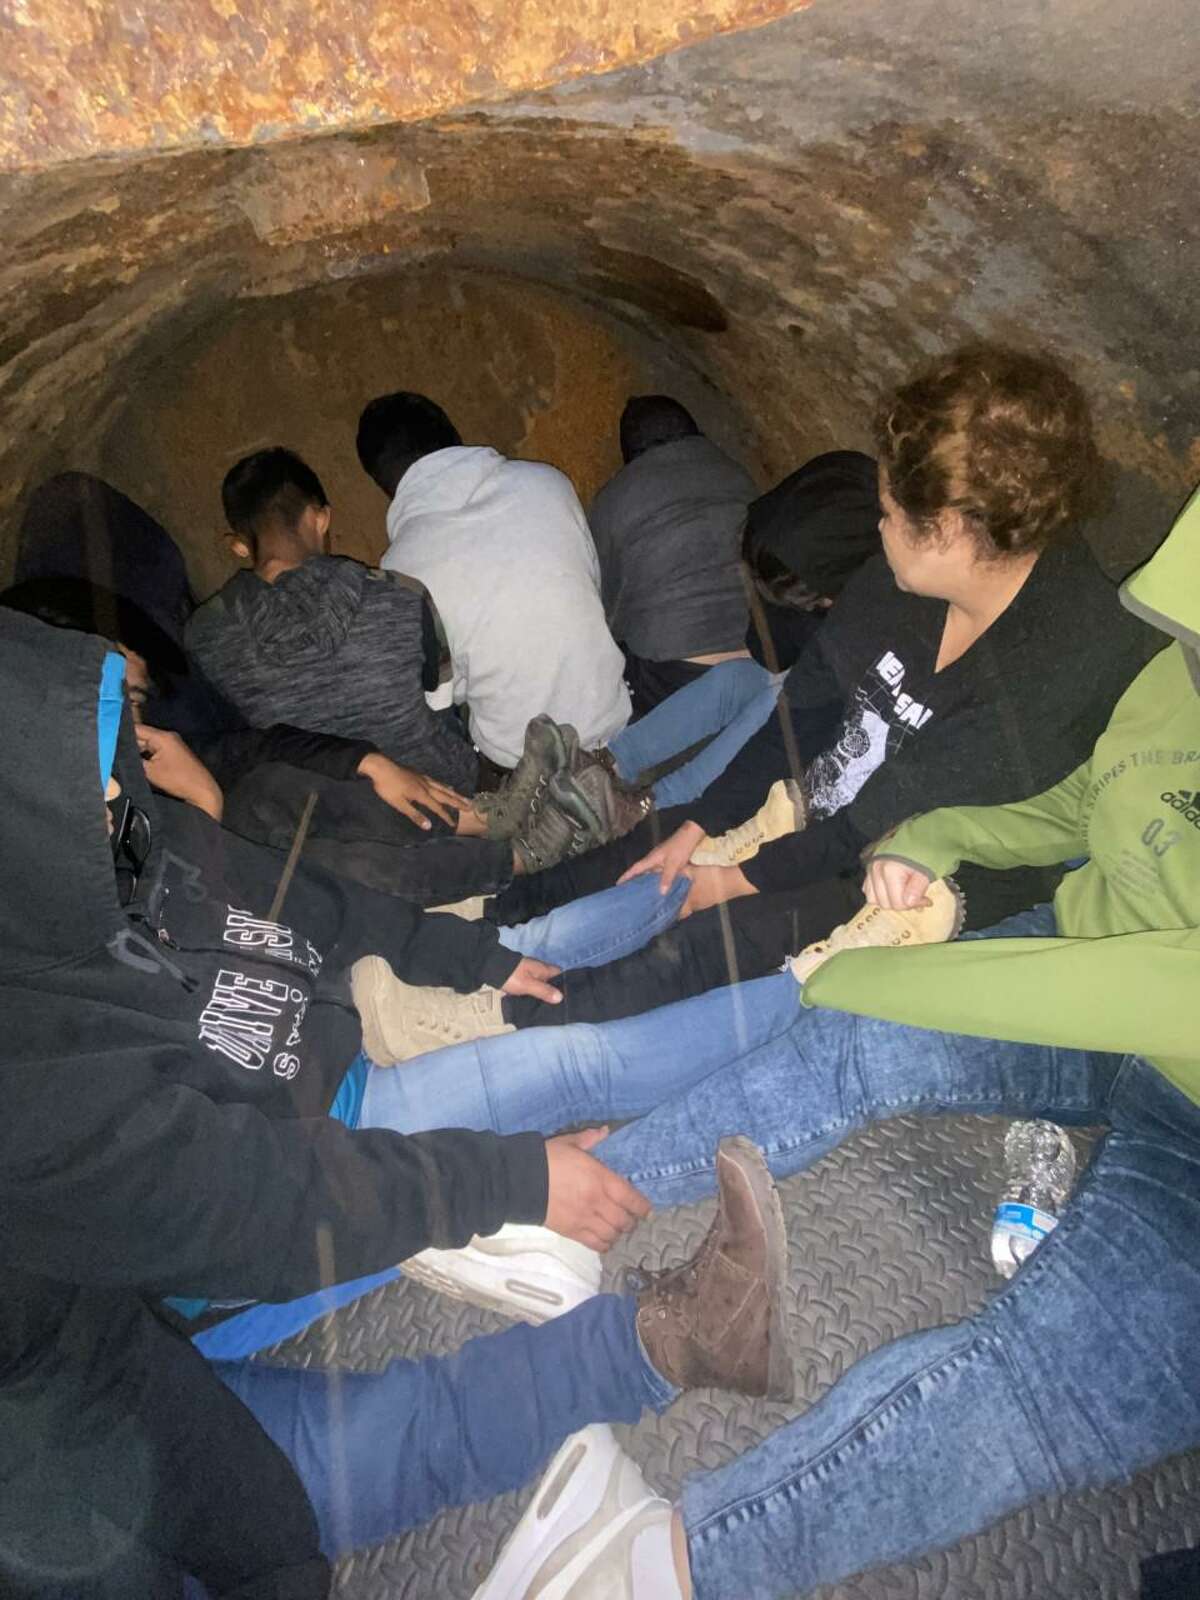 U.S. Border Patrol agents detained nearly 70 migrants found in vacuum tankers in two separate smuggling attempts reported at the checkpoint on U.S. 59 located west of Freer.